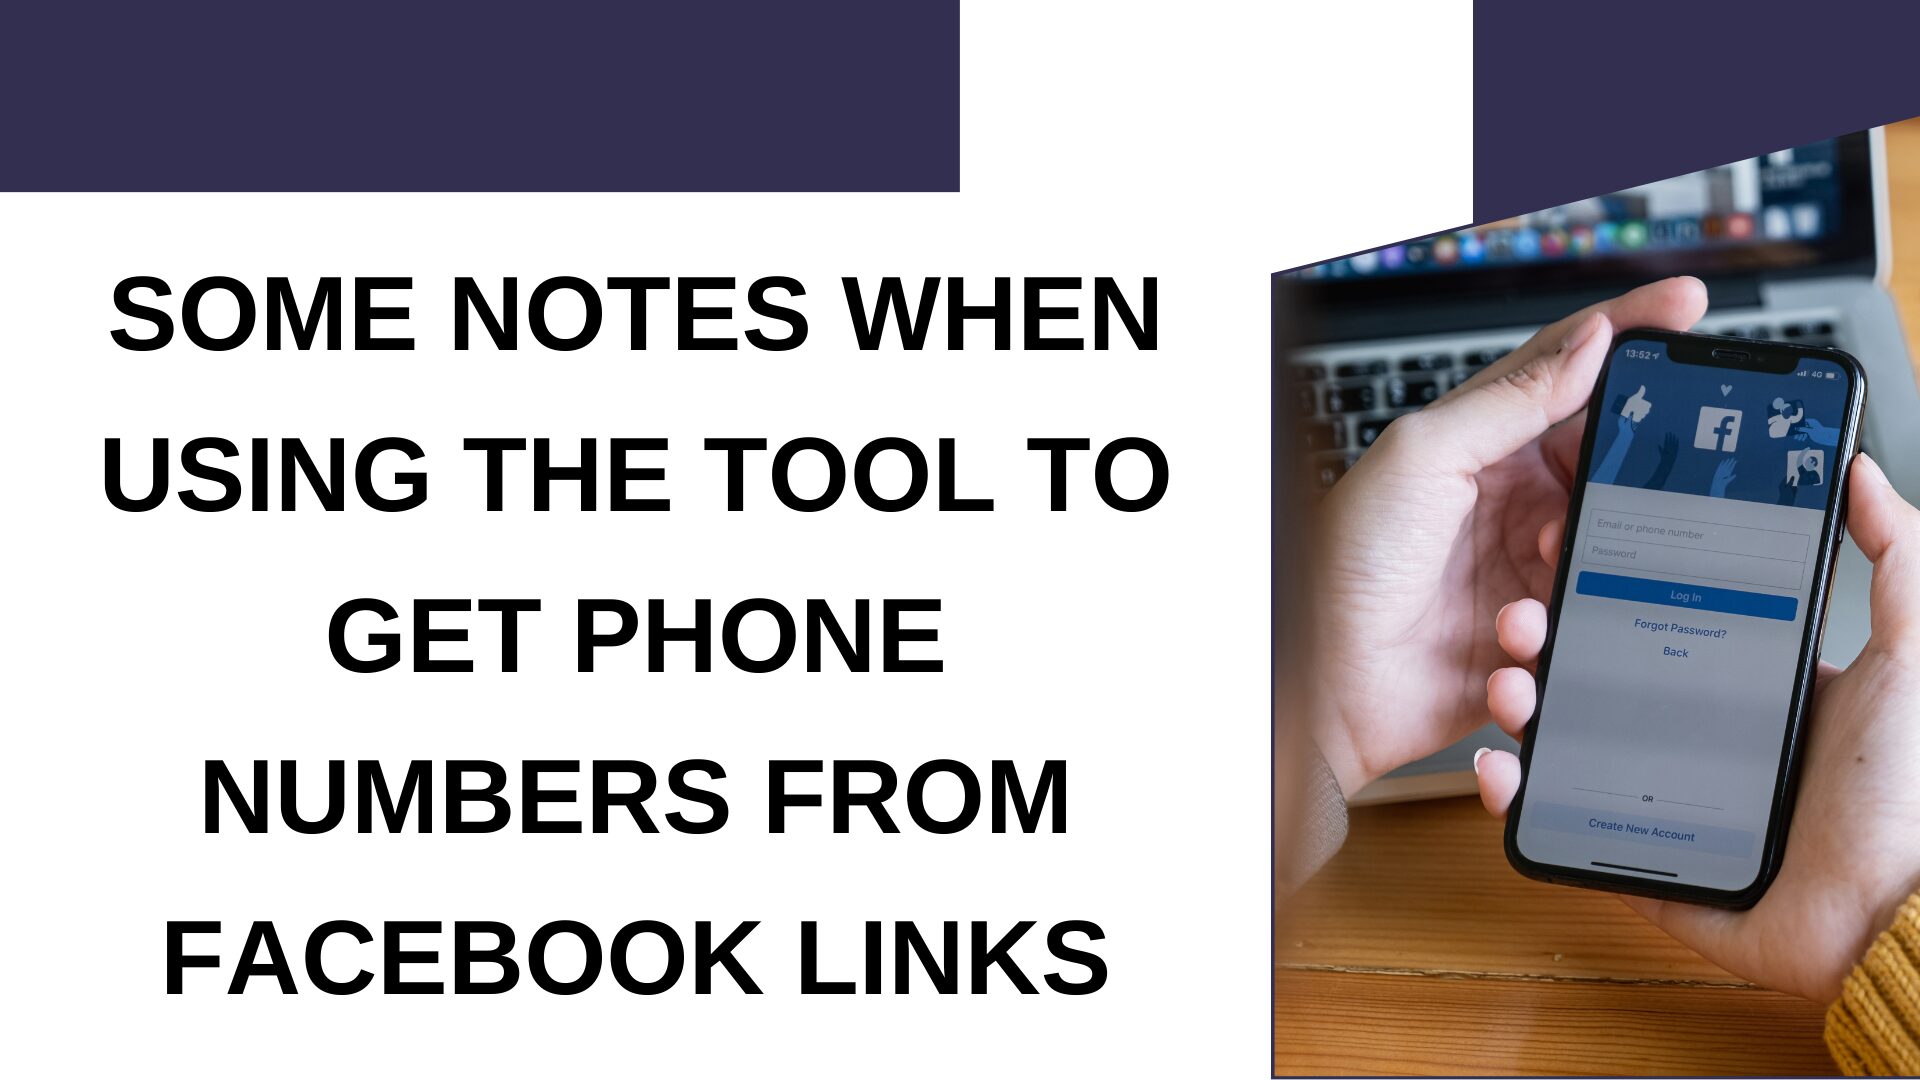 Some notes when using the tools to get phone numbers from Facebook links